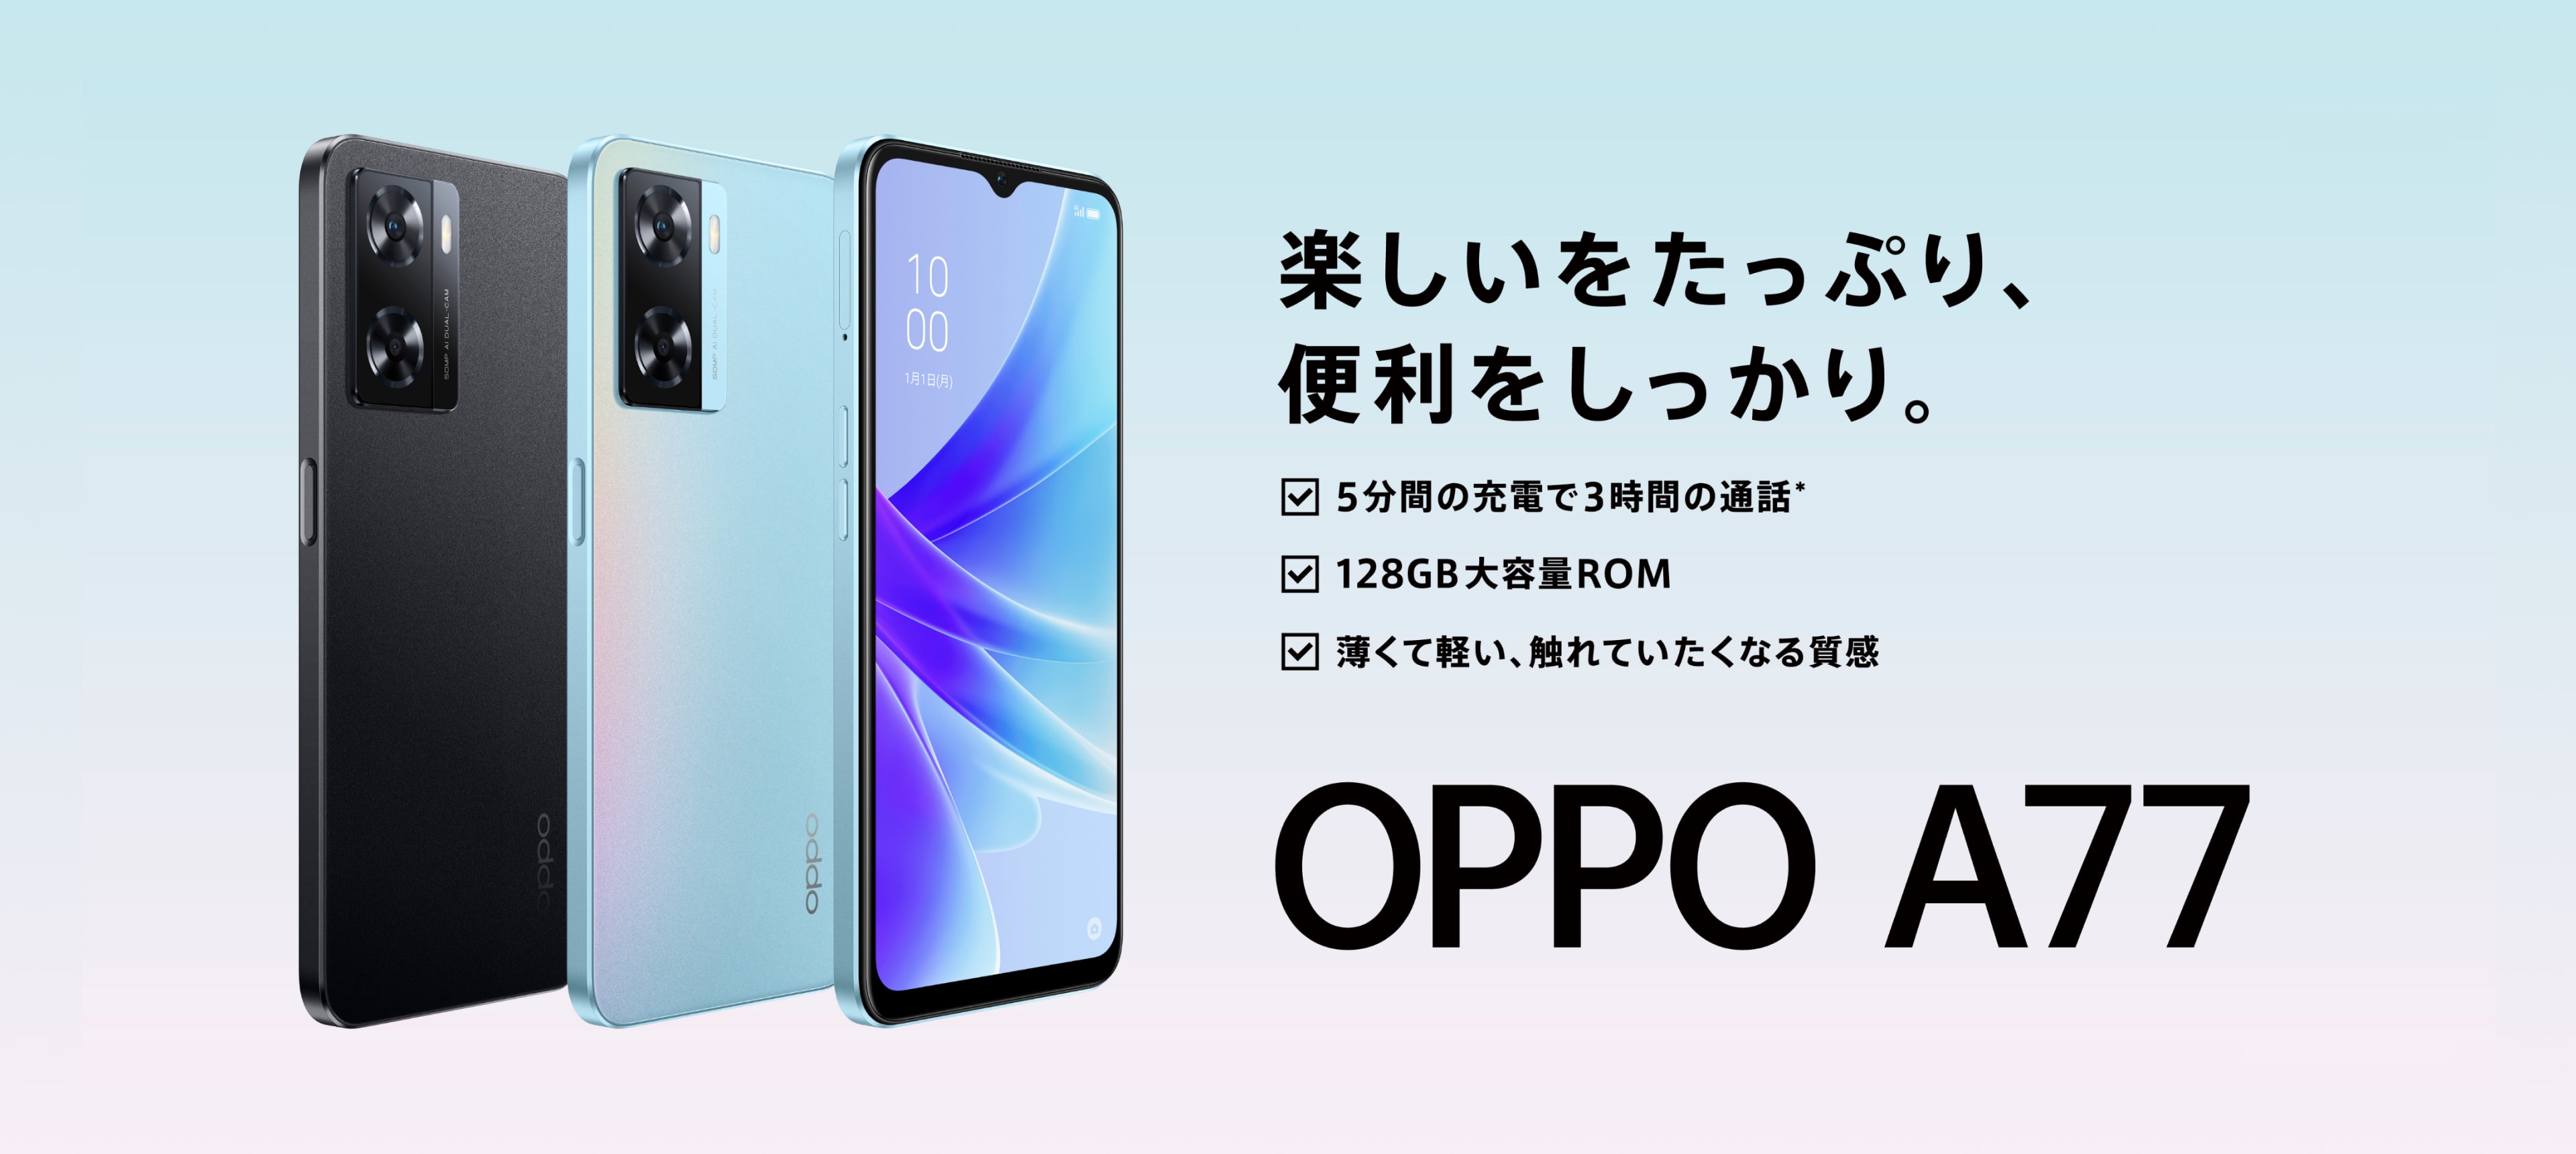 OPPO A77 Android 携帯 スマホ スマートフォン-